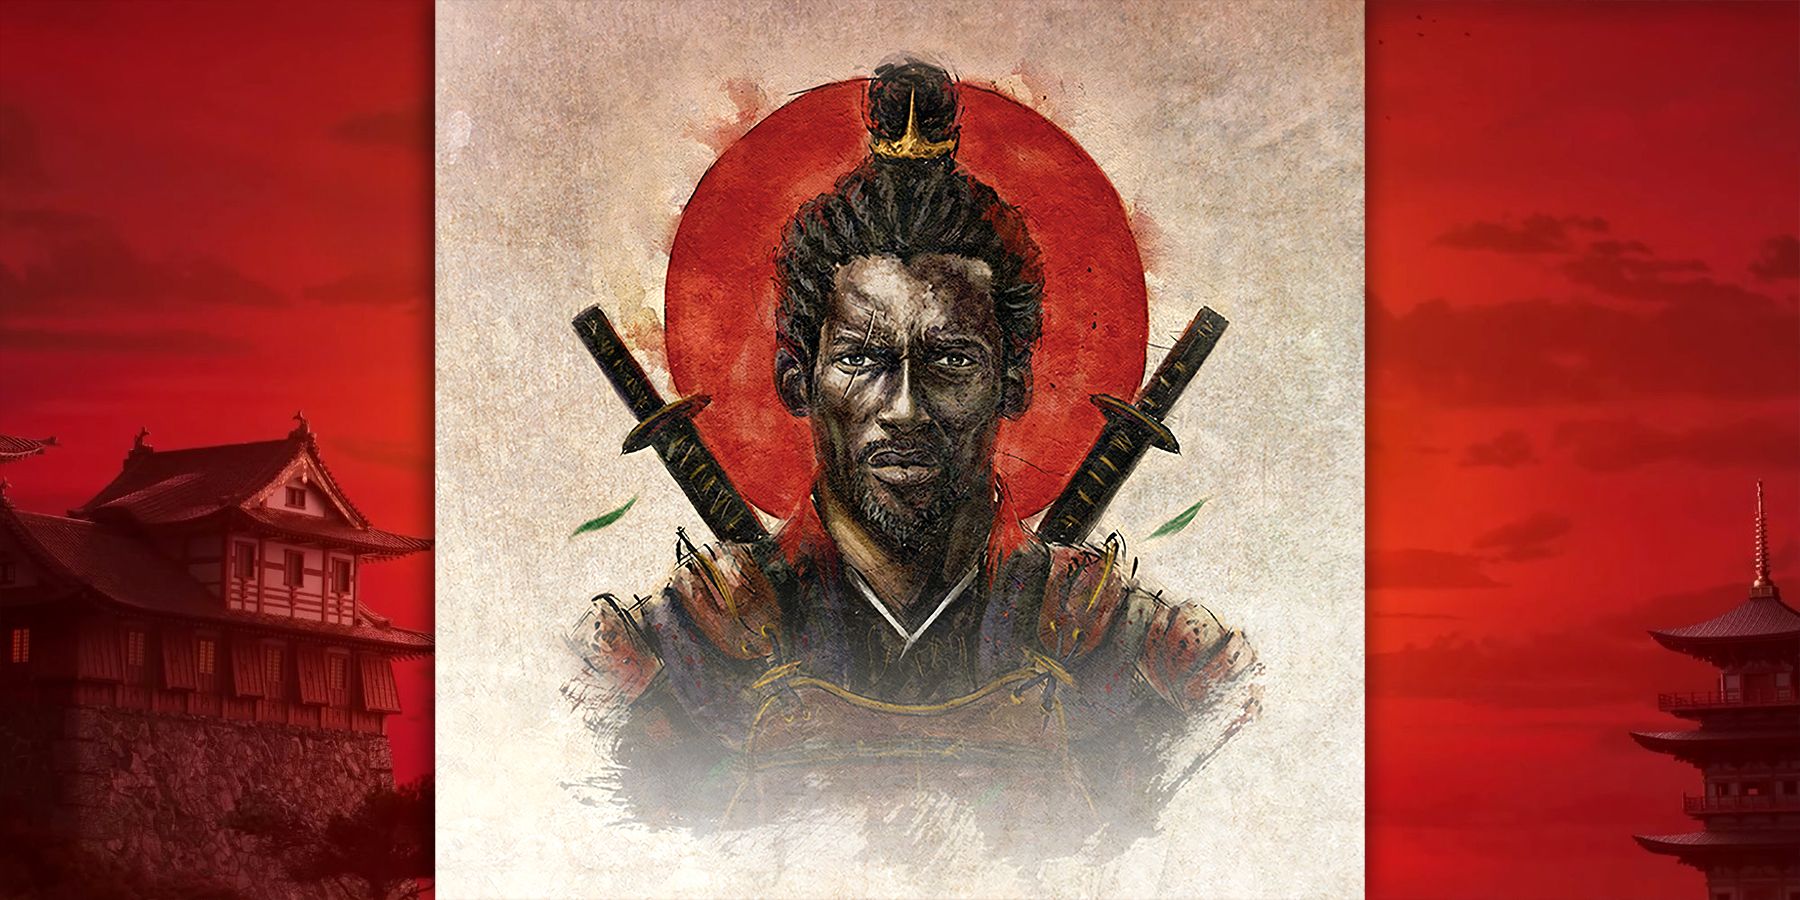 Yasuke over Assassin's Creed Red background